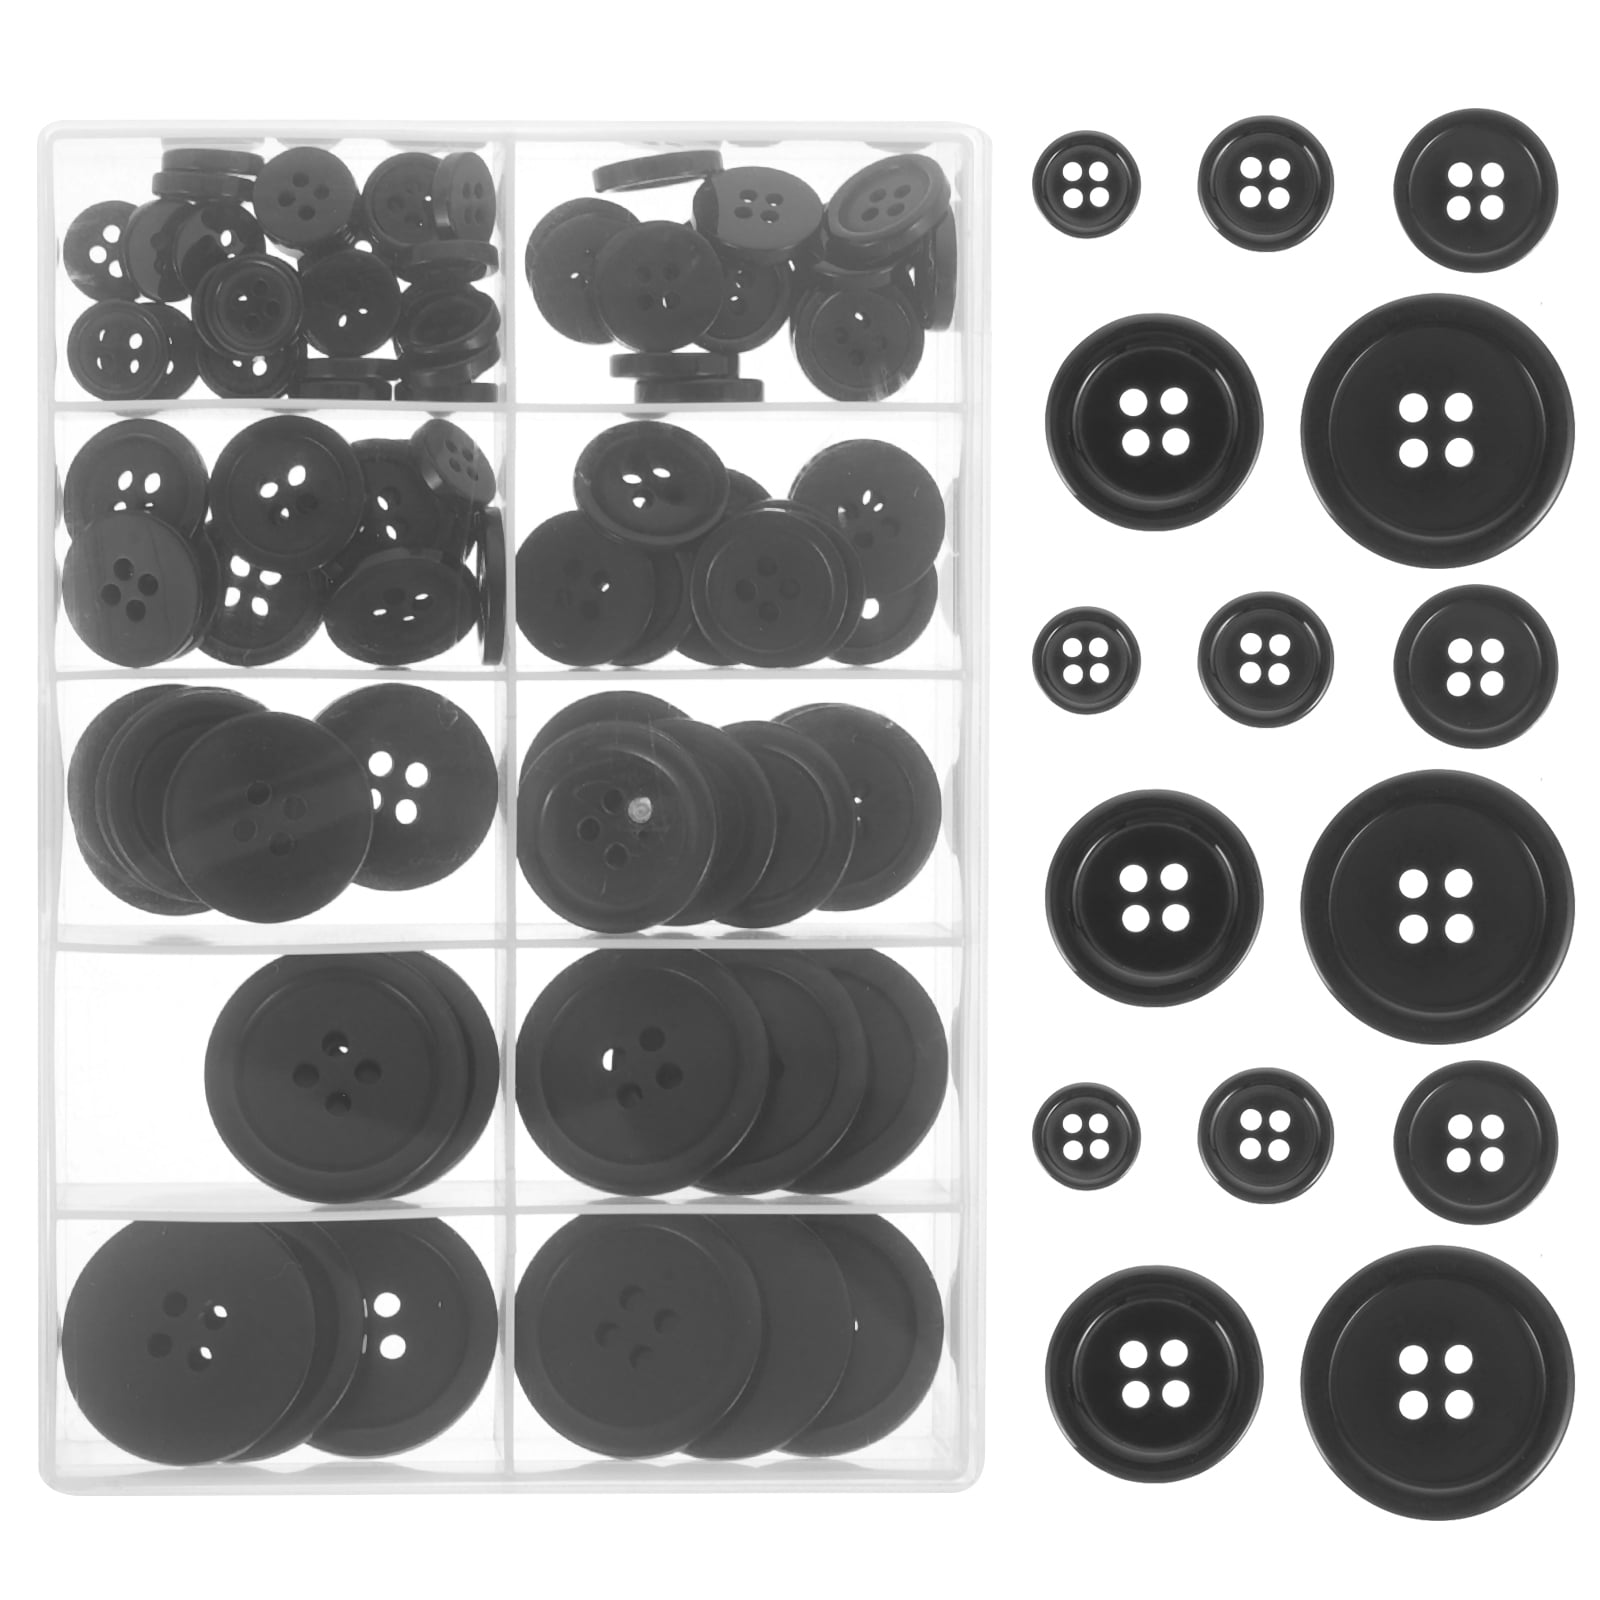 20pcs Clothing Replacement Buttons Stylish Coat Buttons Clothes DIY Buttons, Size: 1.5X1.8X1.8CM